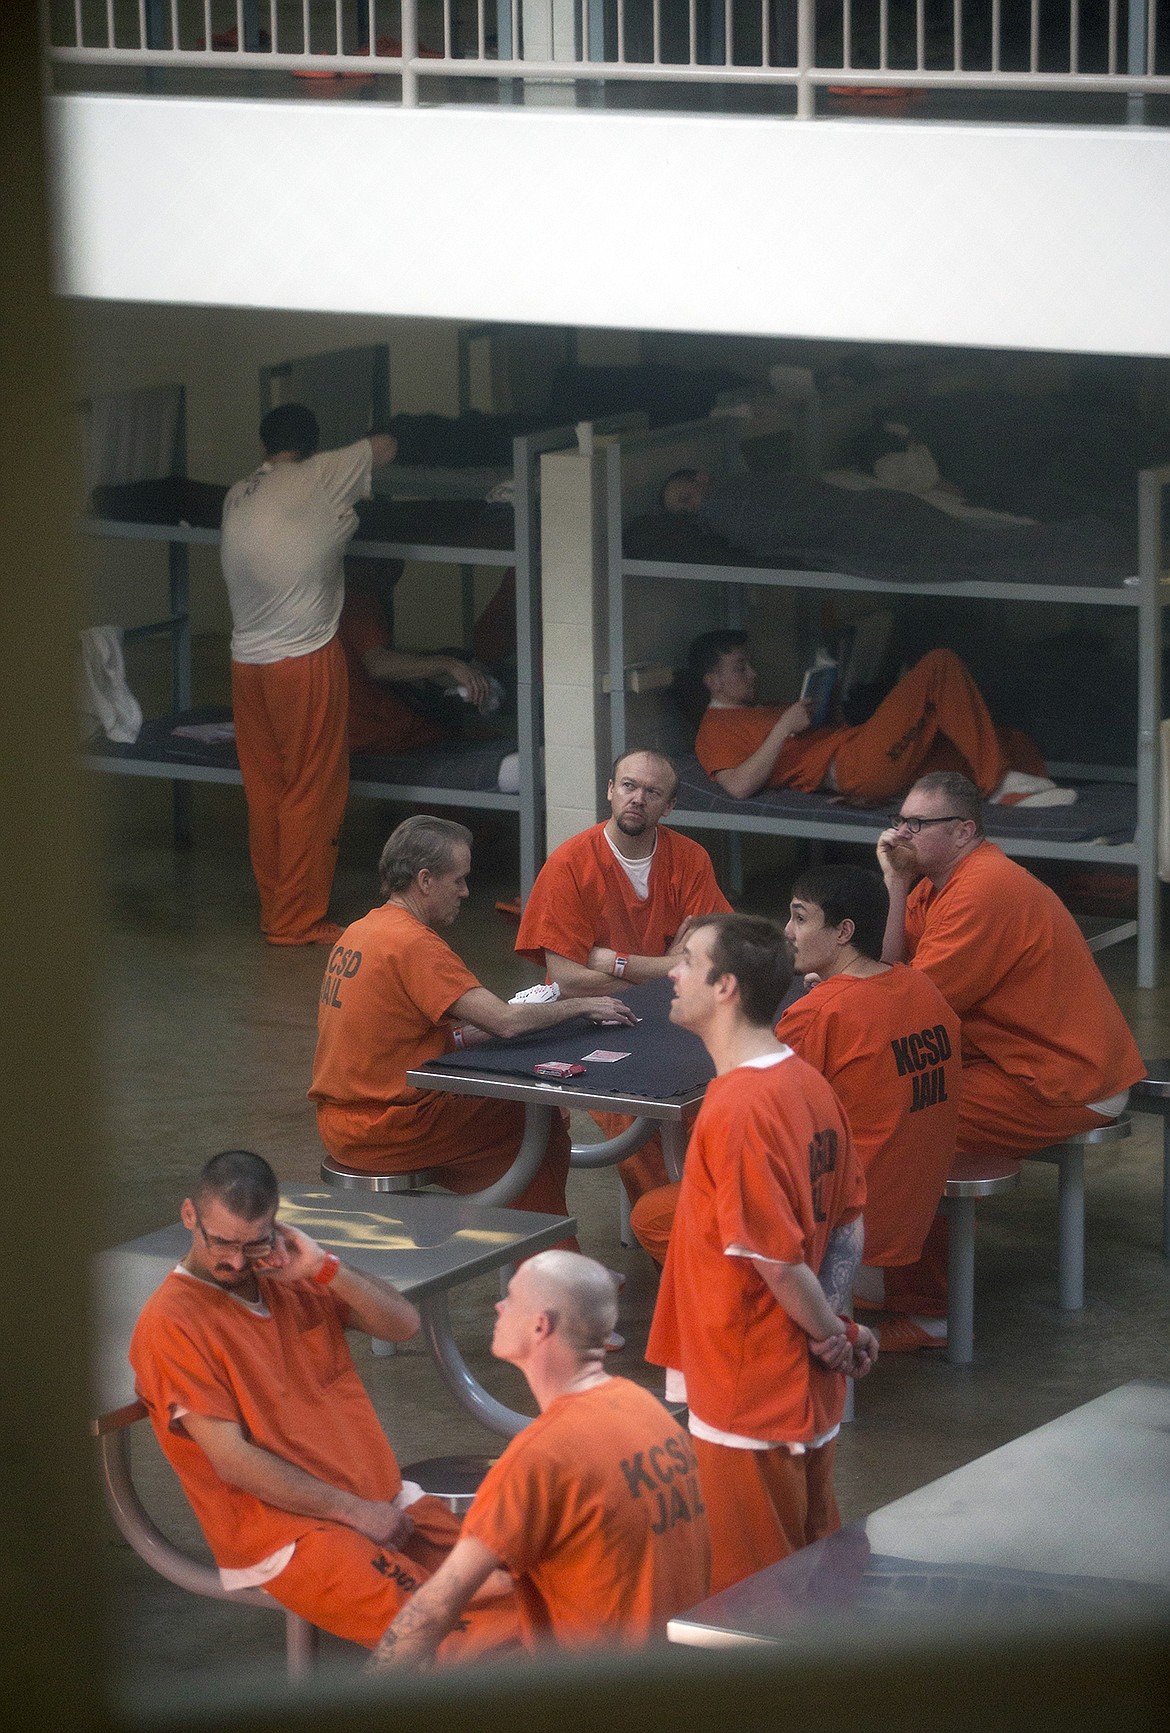 LISA JAMES/PressKootenai County Jail inmates congregate, while some read in their bunks, on April 3. The jail has been at maximum capacity in 2017. County commissioners voted Thursday on the budget for a jail expansion project.